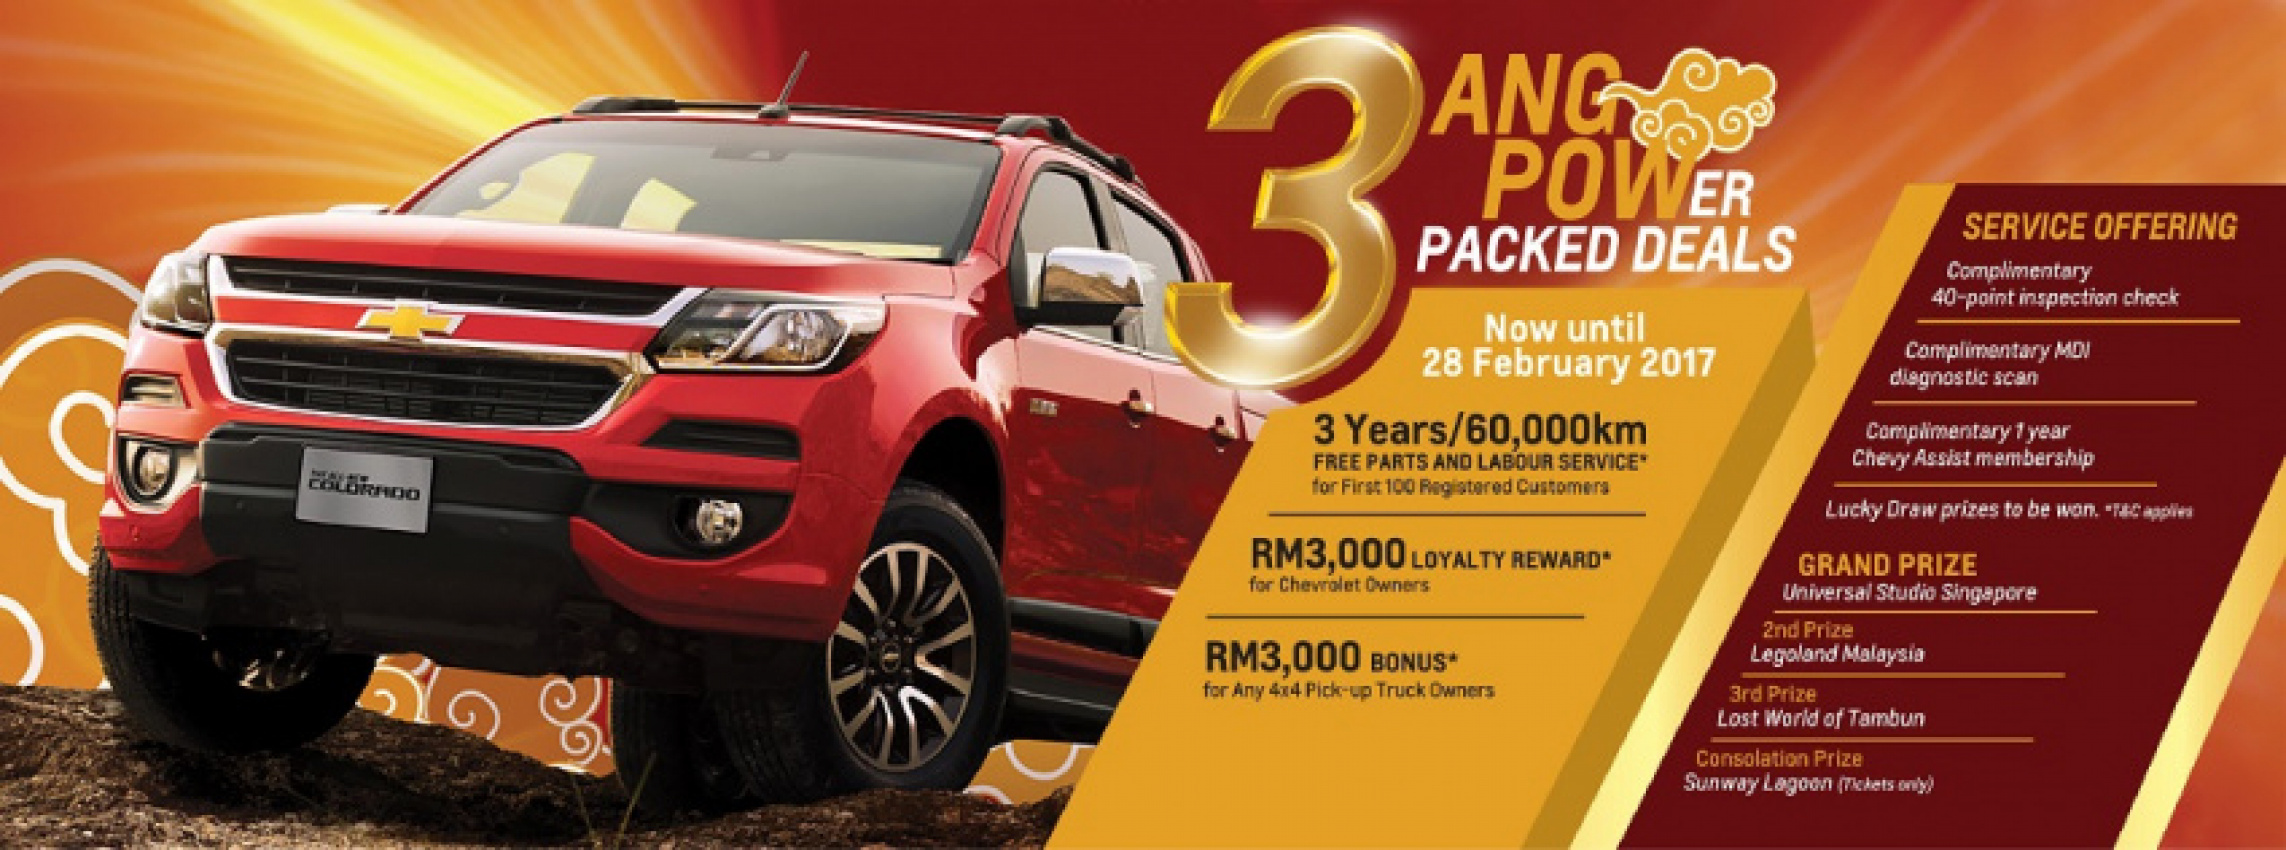 autos, car brands, cars, chevrolet, chevy, naza quest, naza quest offers ang power-packed deals for chevrolet